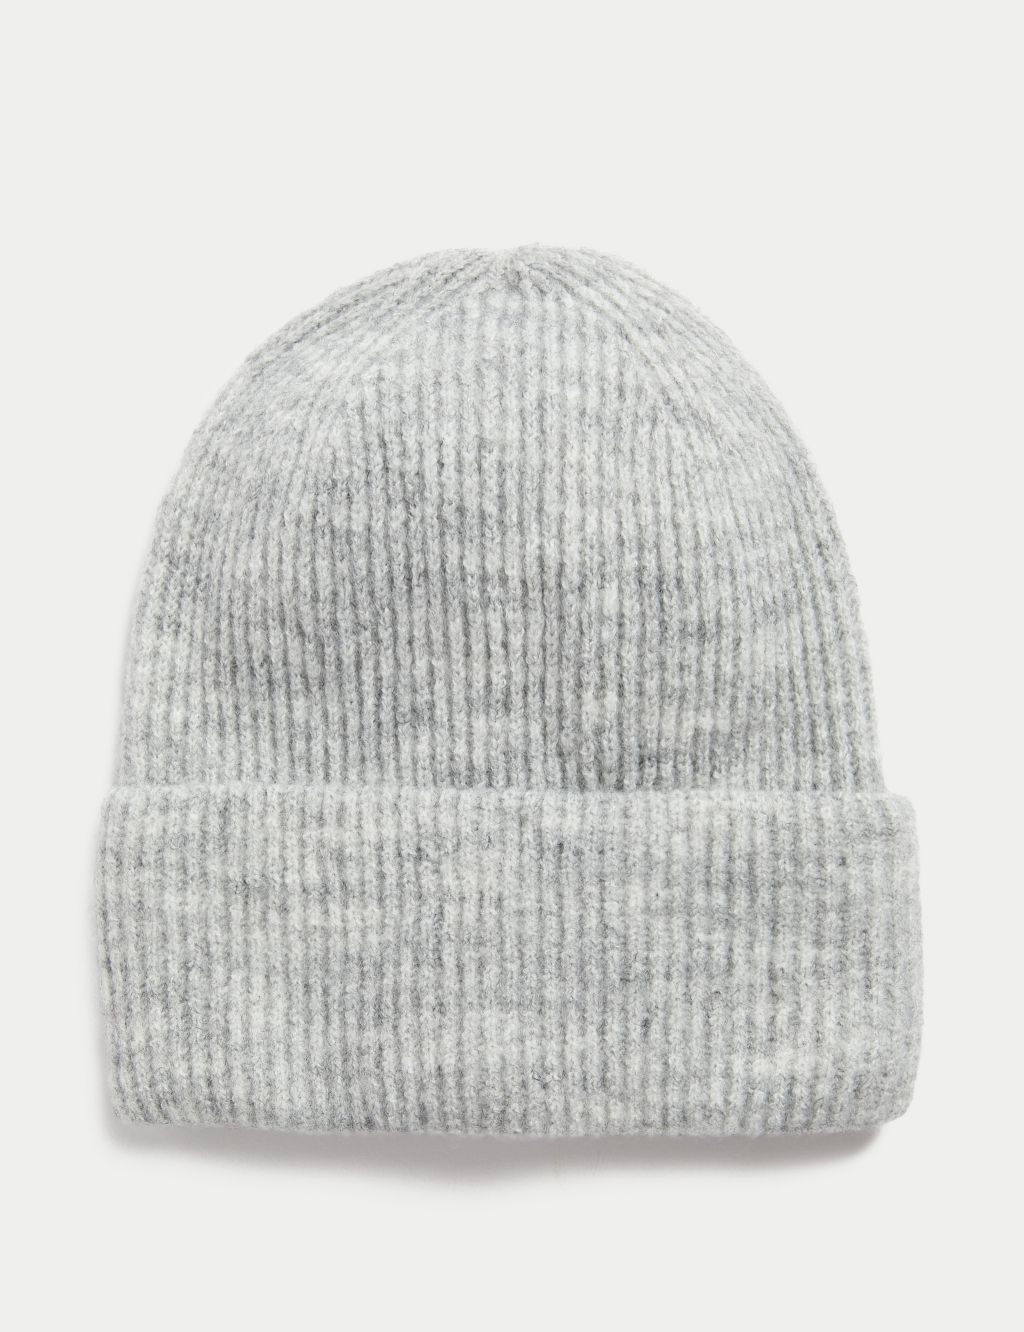 Ribbed Beanie Hat image 1